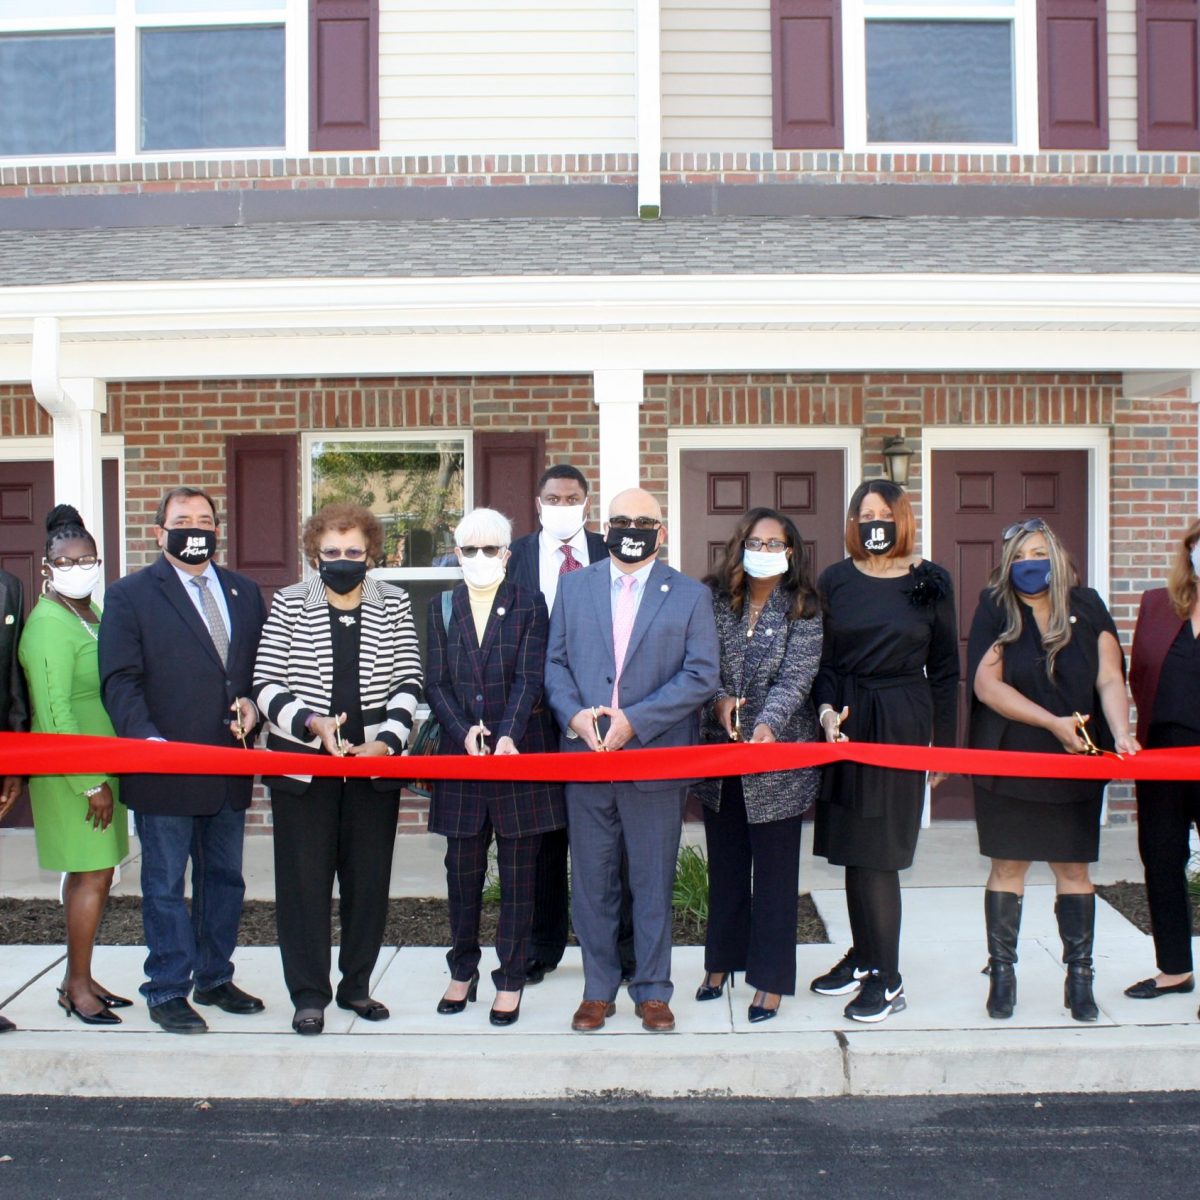 Cutting the ribbon on Thursday, Oct. 15, 2020 to mark the completion of downtown Trenton’s newest affordable housing community, Turner Pointe, were (l. to r.) THA Redevelopment Project Mgr. Chrysti Huff, THA Board Chair Clifton Anderson, THA Commissioner Darlene Weldon, NJ Assemblyman Anthony Verrelli, NJ St. Sen. Shirley Turner (the namesake of Turner Pointe), Trenton City Councilwoman Marge-Caldwell Wilson, THA Exec. Dir. Jelani Garrett, Trenton Mayor Reed Gusciora, NJ Assemblywoman Verlina Reynolds-Jackson, NJ Lieutenant Governor Sheila Oliver, HUD Regional Administrator Lynne Patton, TD Bank VP Sue Taylor, and Conifer Realty Project Director Janine Owens.